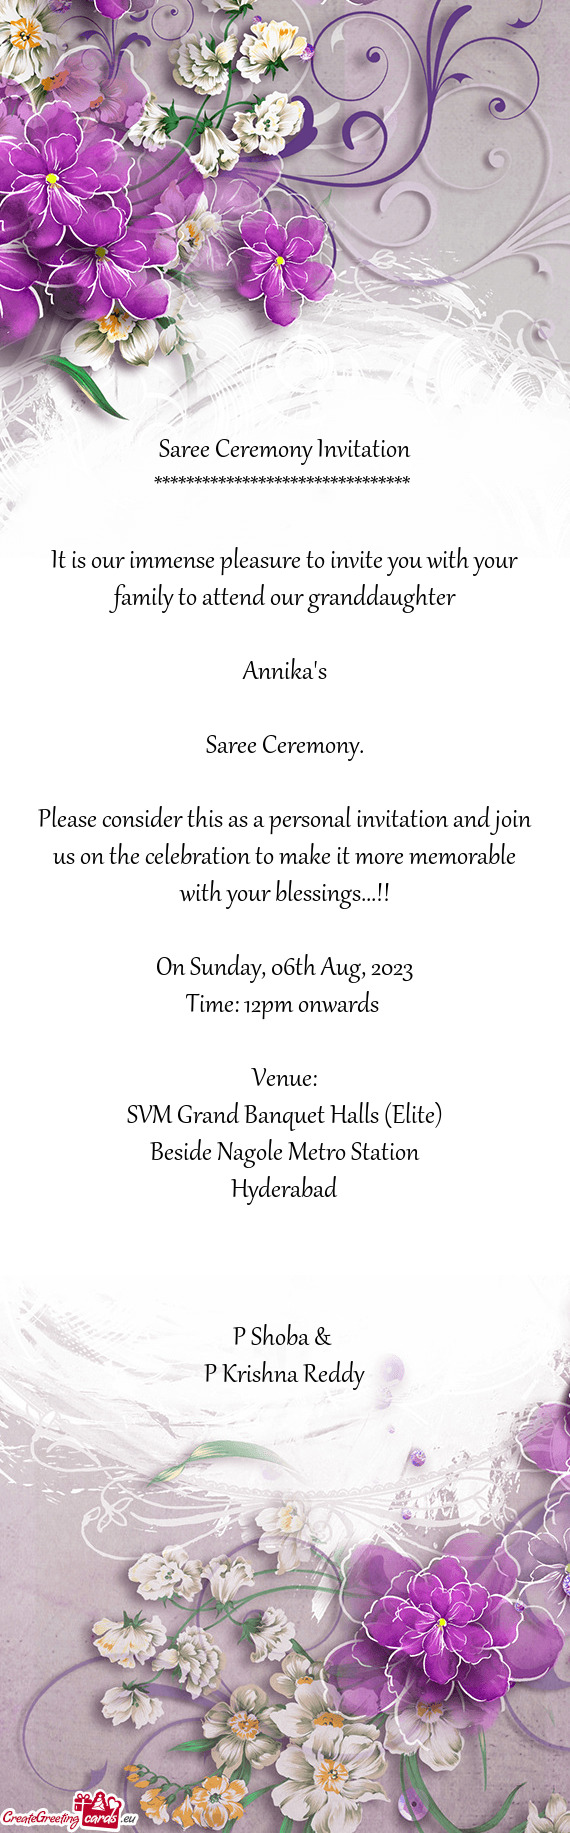 It is our immense pleasure to invite you with your family to attend our granddaughter